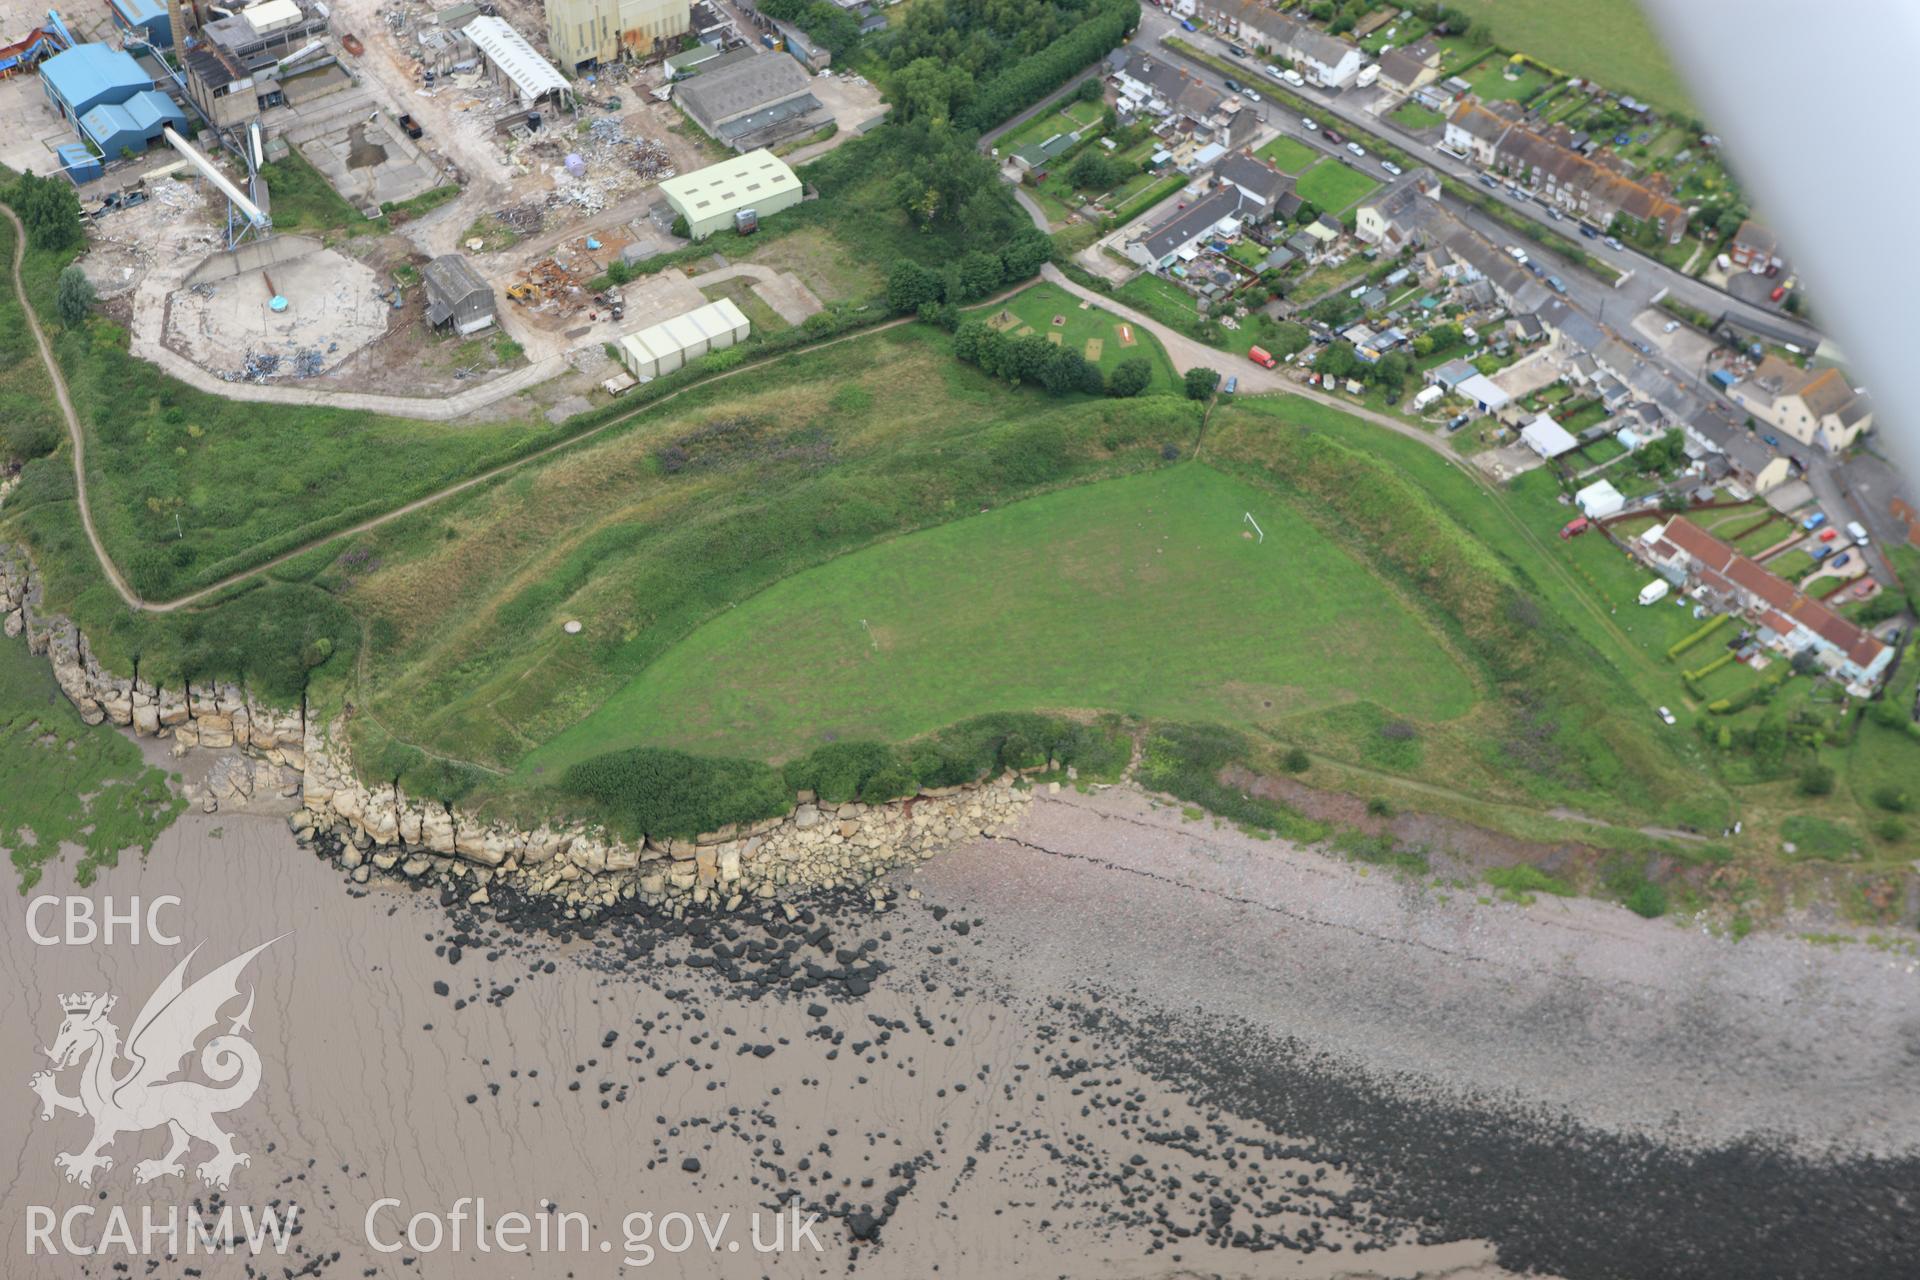 RCAHMW colour oblique aerial photograph of Sudbrook Fort, Portskewett. Taken on 09 July 2009 by Toby Driver